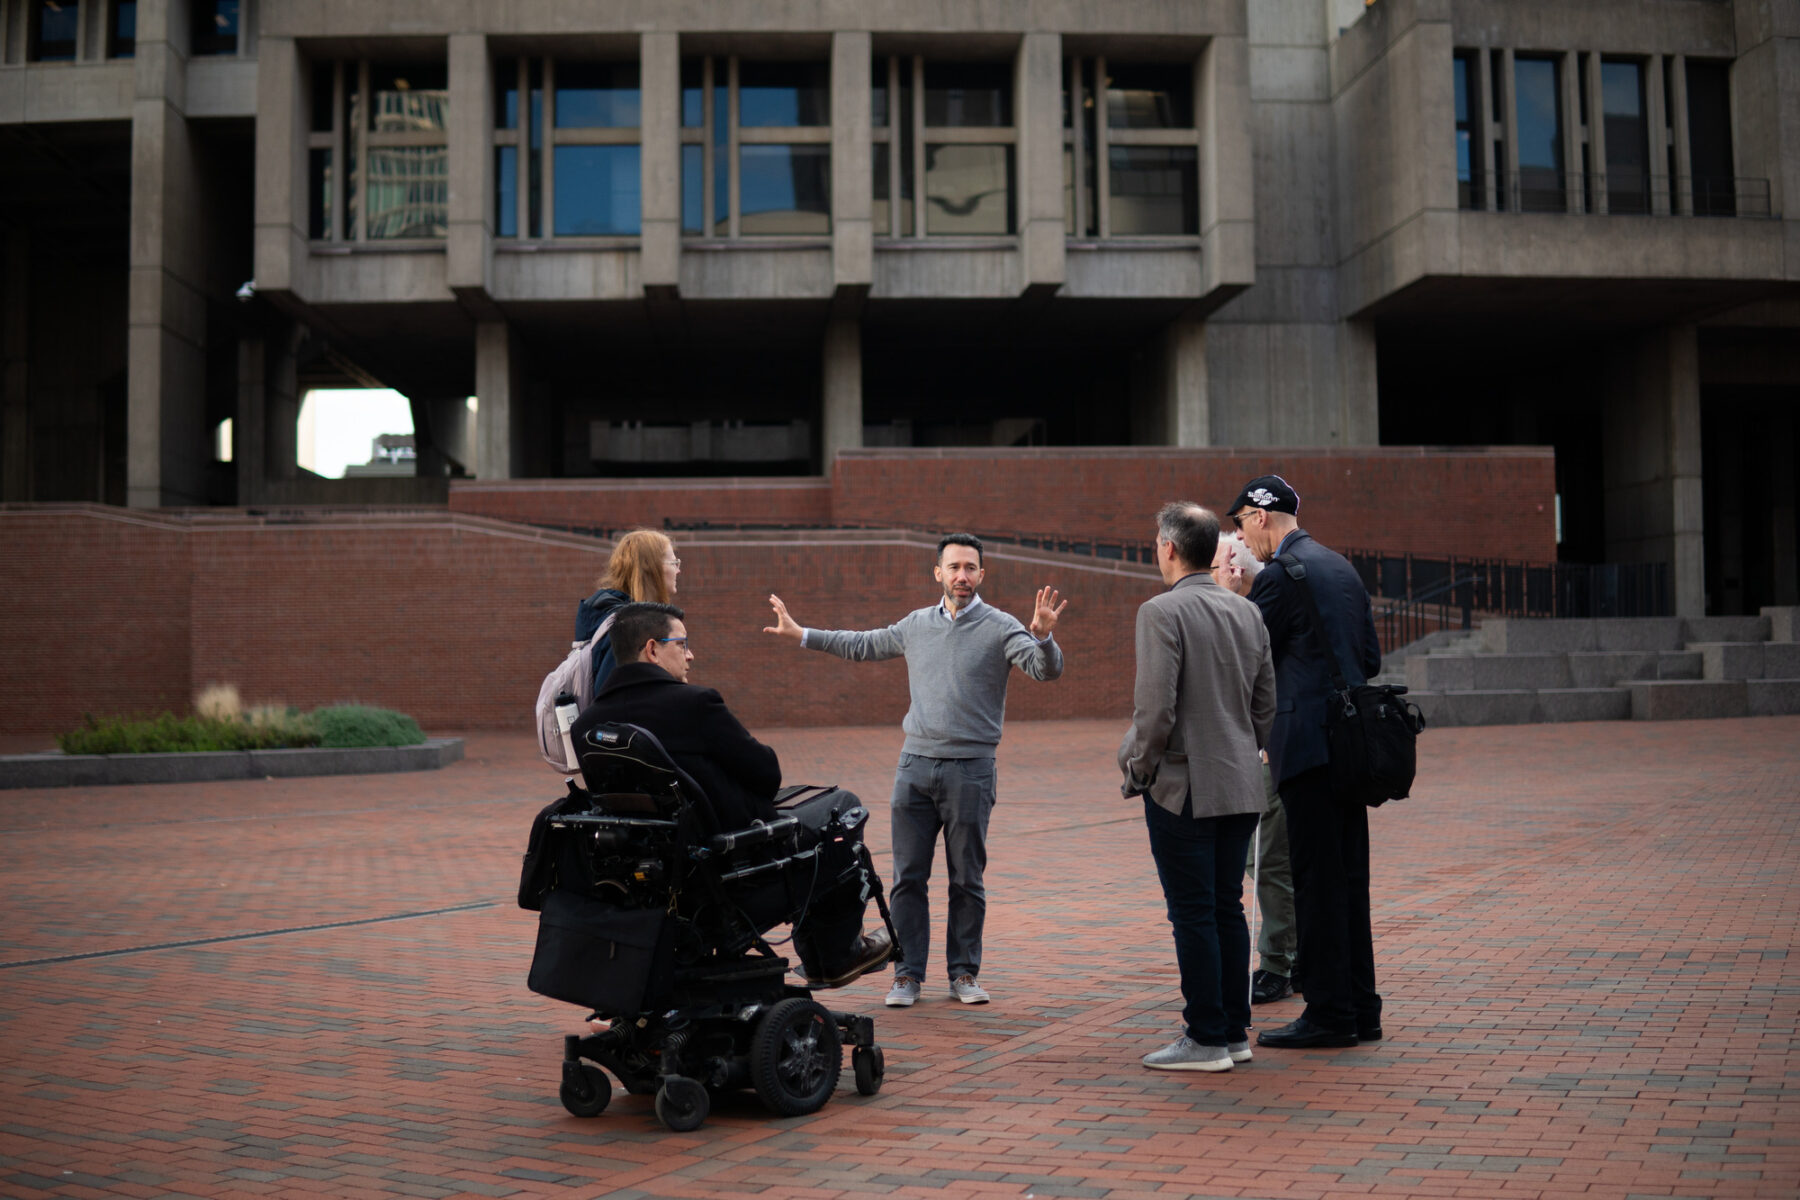 Six people assembled on Boston City Hall Plaza. One person gestures with his arms open towards the space around them